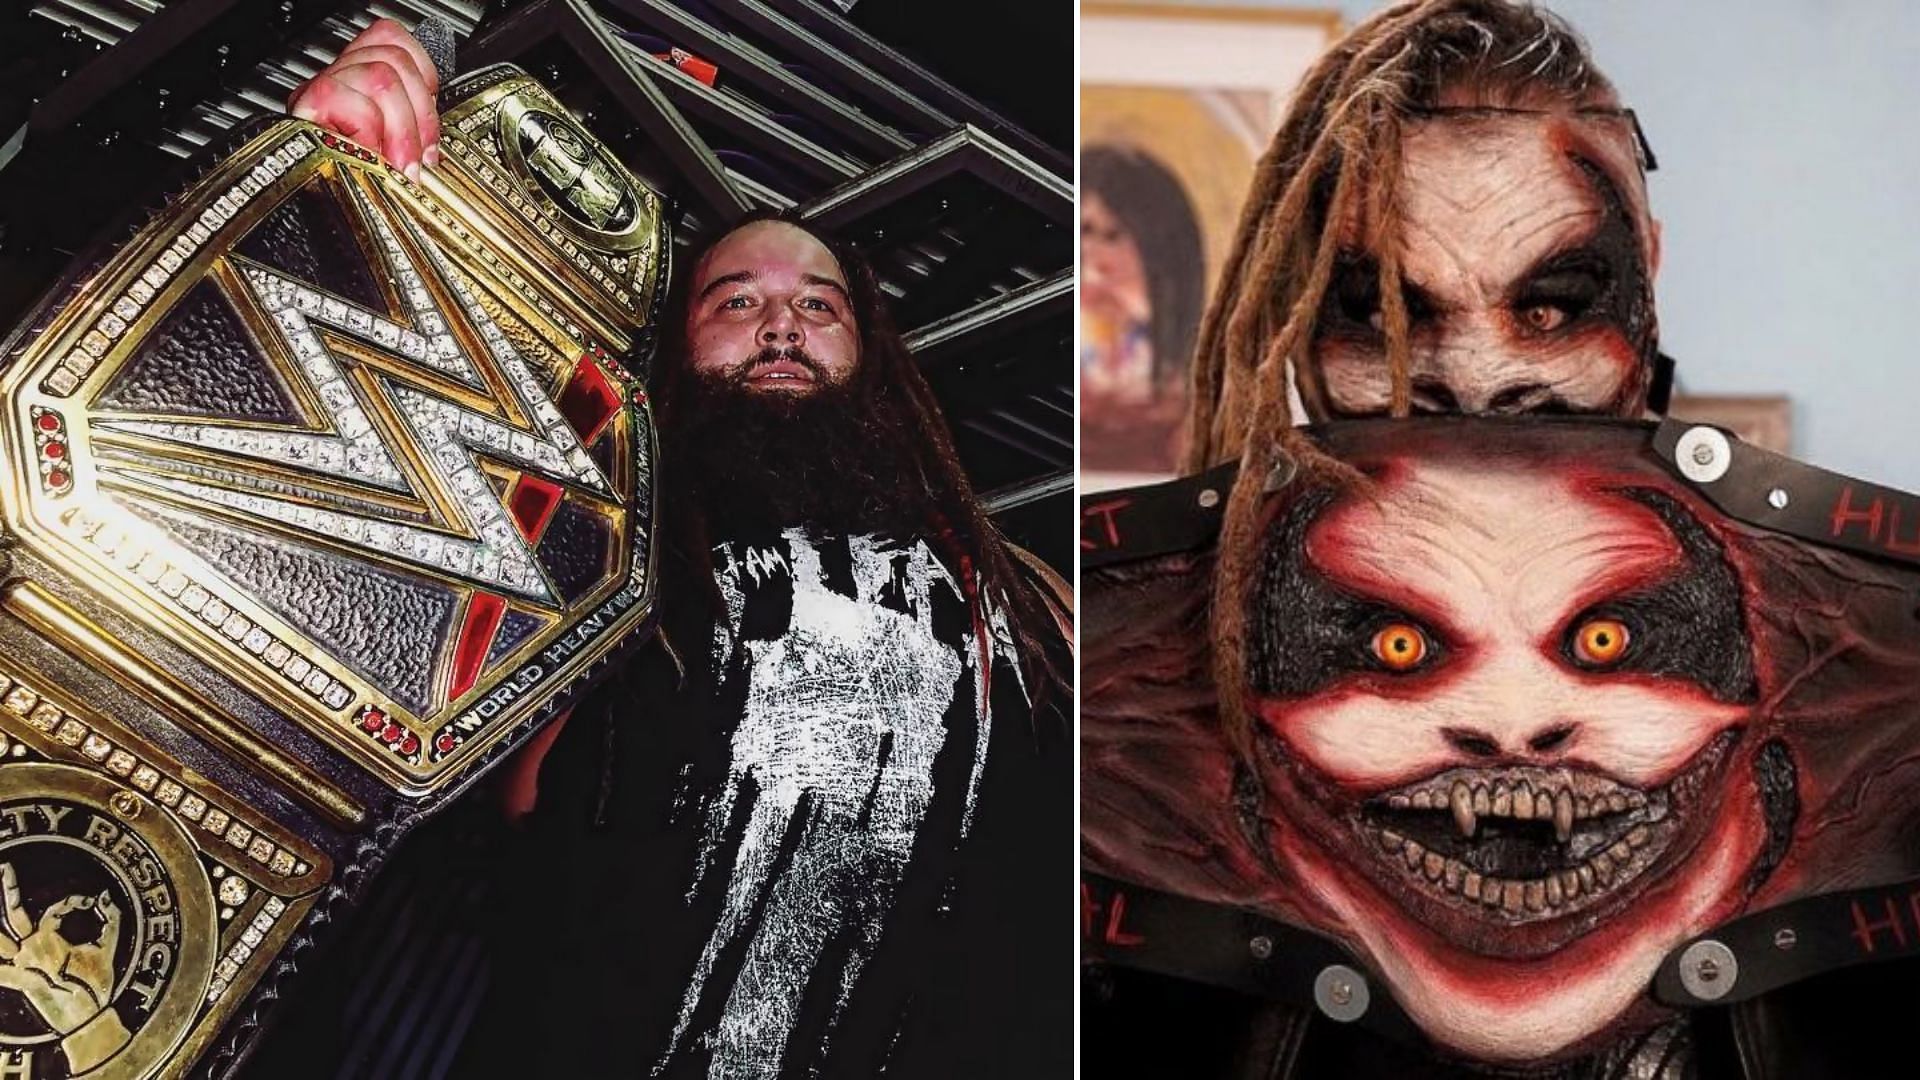 Bray Wyatt after first WWE Championship W (left); with custom-made Universal Championship (right)